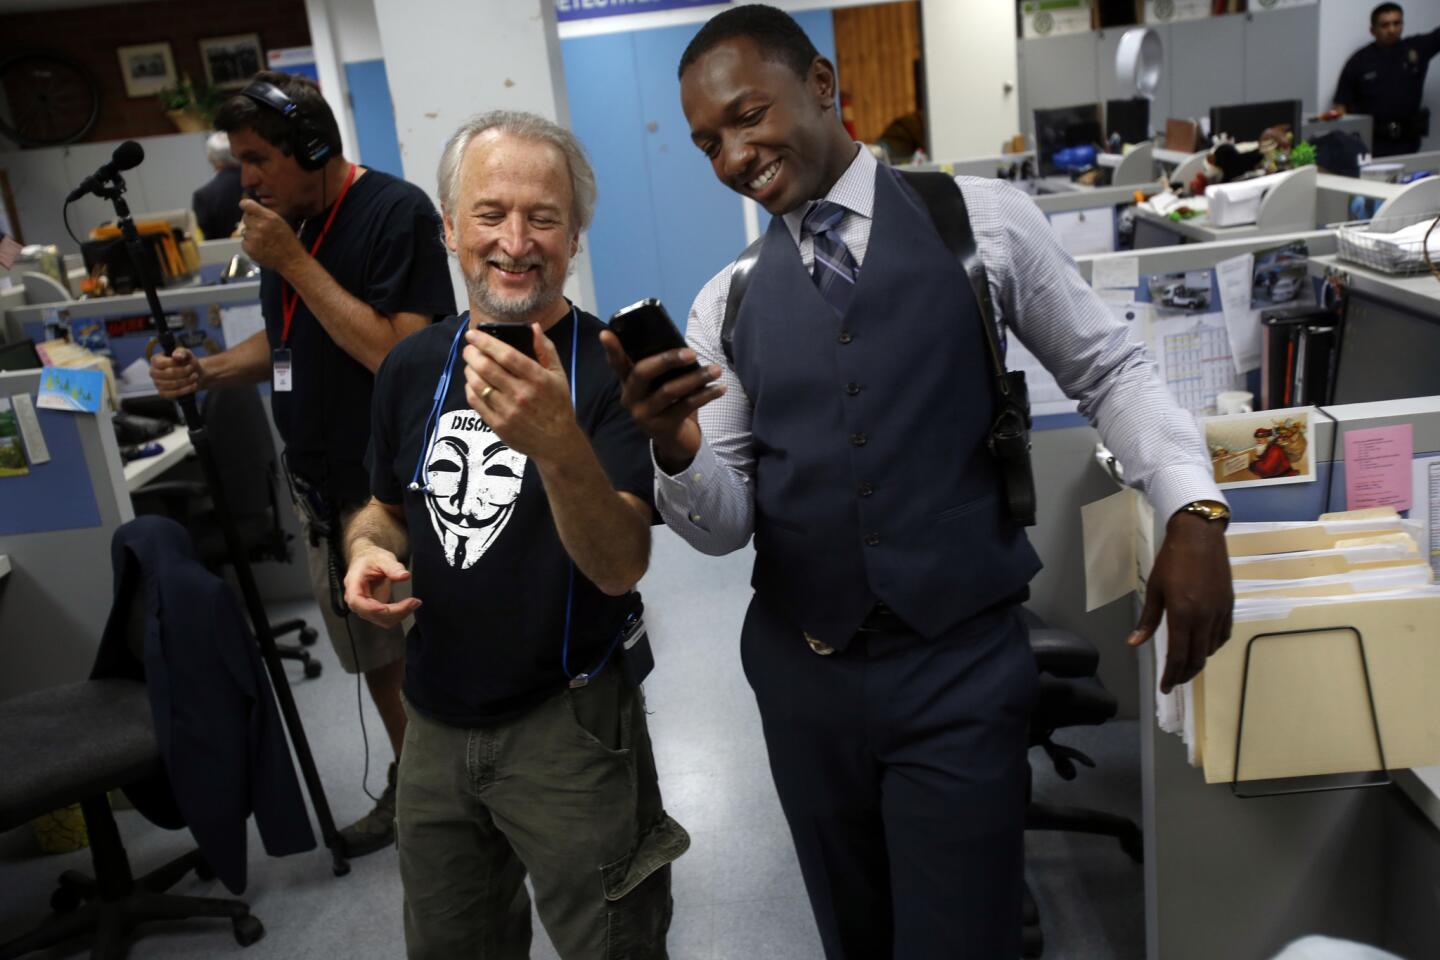 Kevin Dowling, left, and Jamie Hector, who plays a homicide detective, take a cellphone photo on the set of the Amazon series.